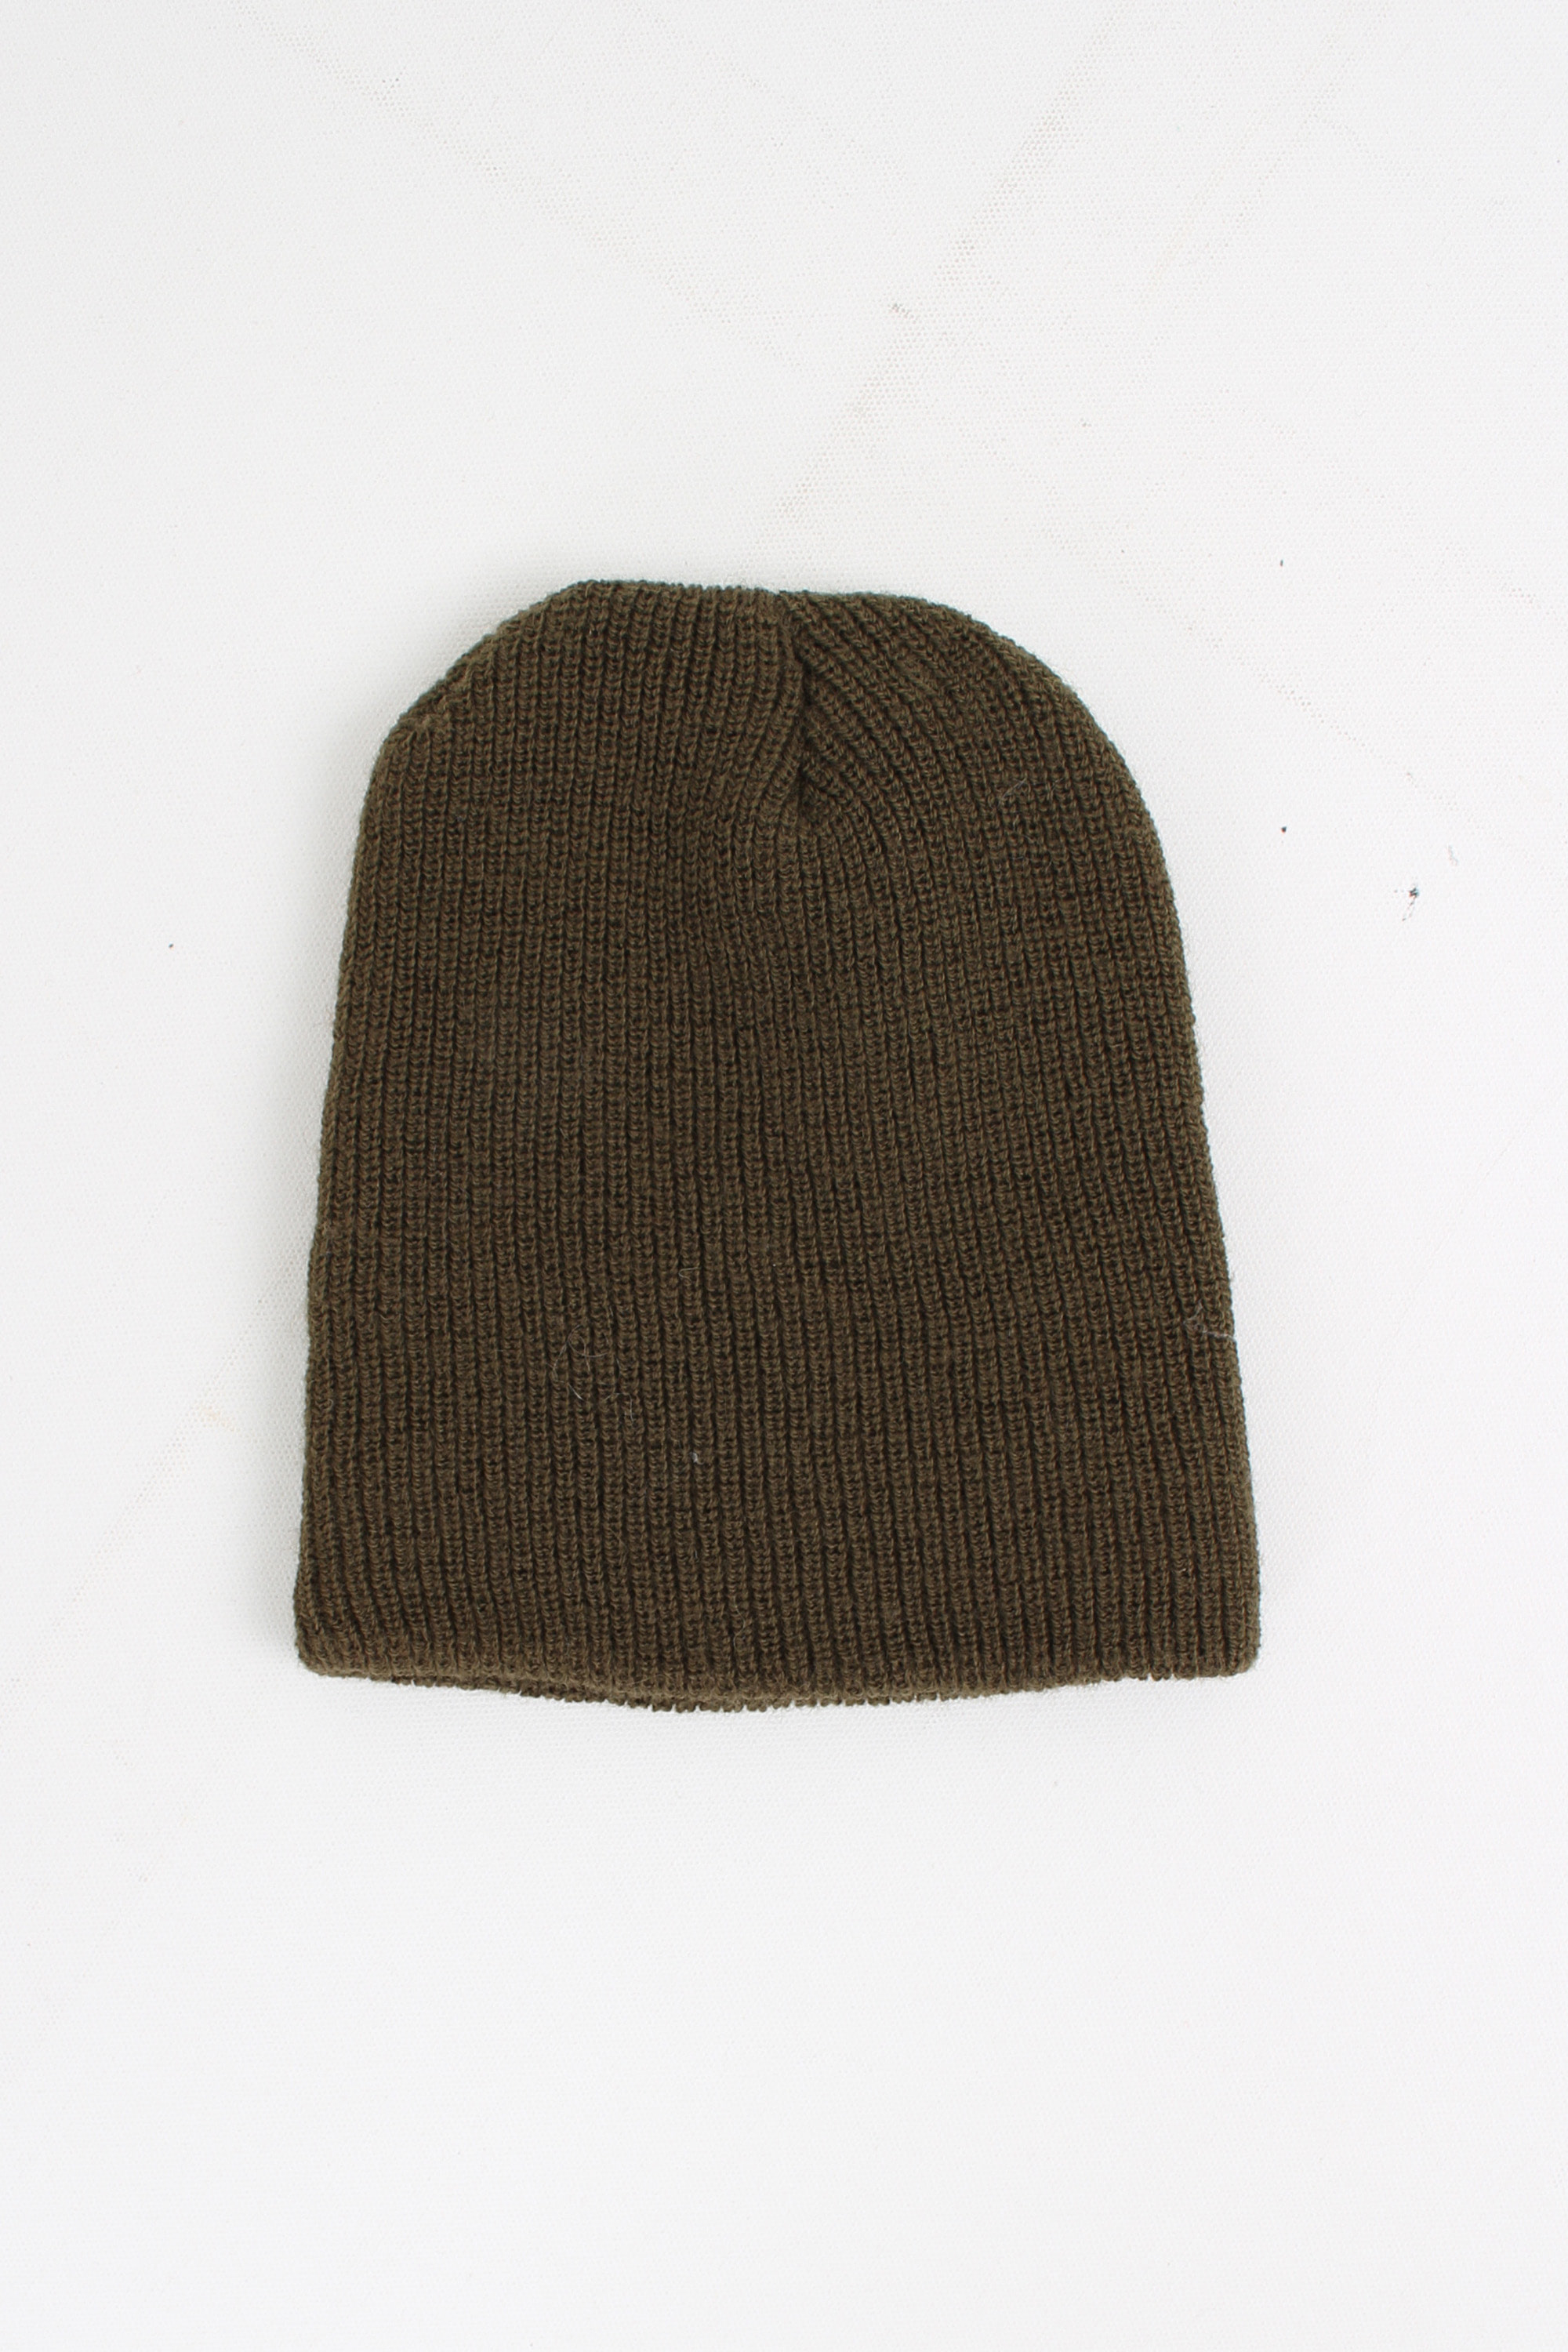 vintage wool beanie(made in usa)